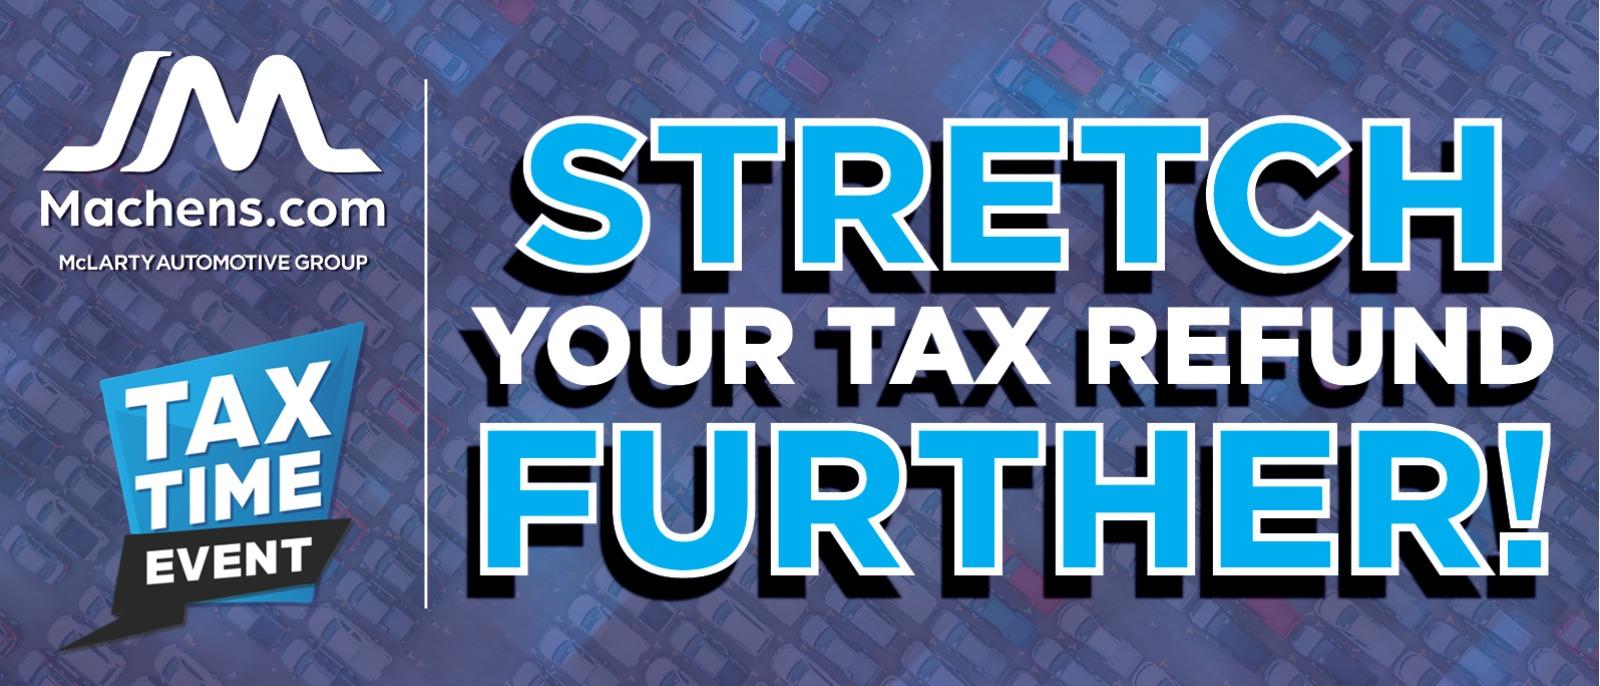 Stretch your Tax refund further - View Pre-owned inventory